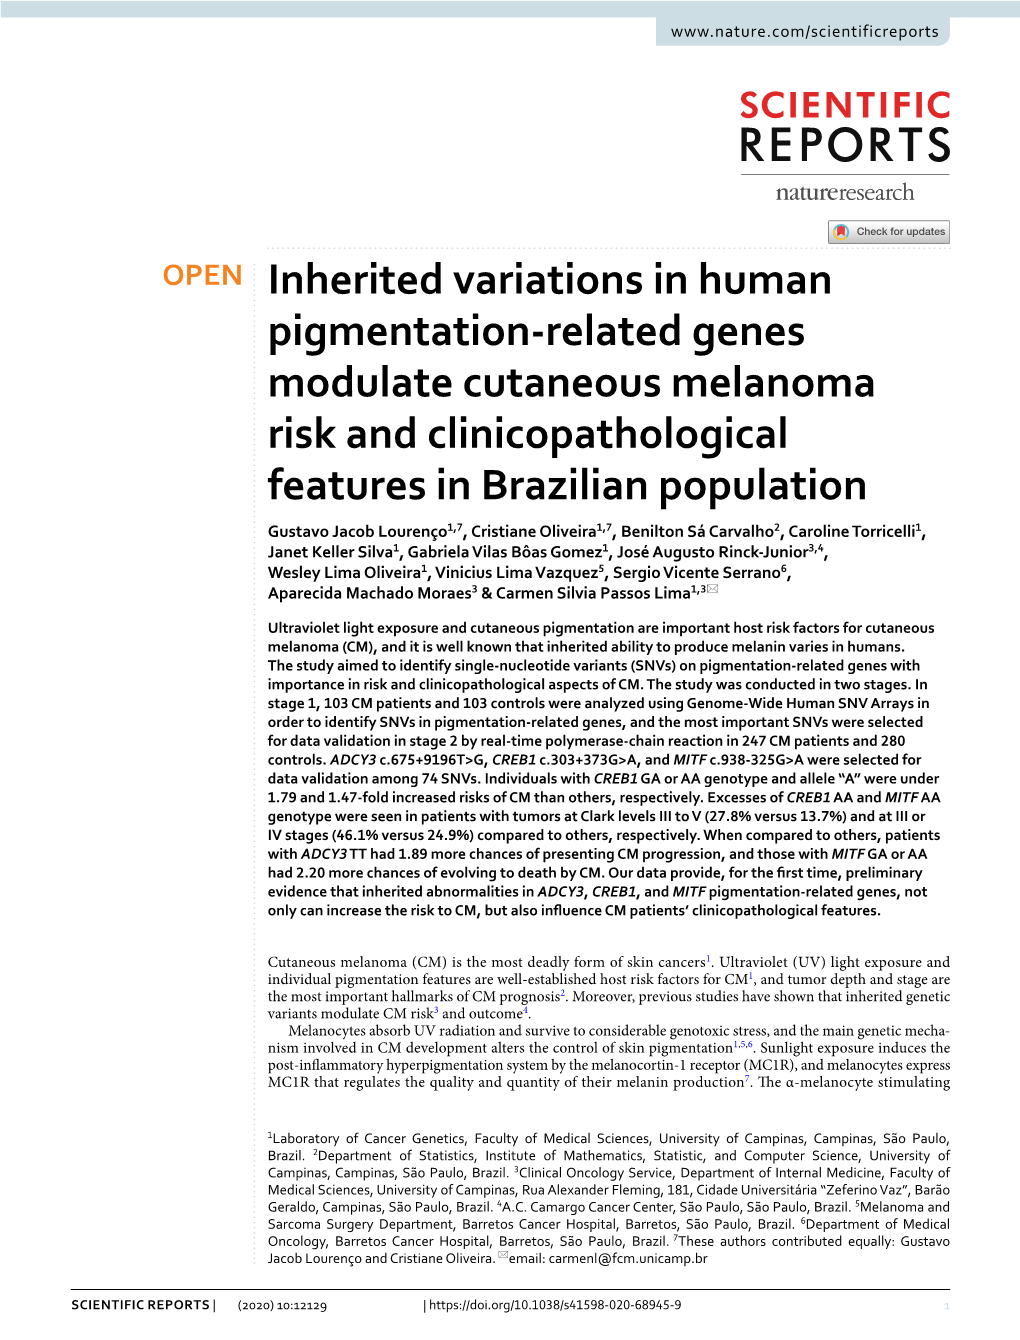 Inherited Variations in Human Pigmentation-Related Genes